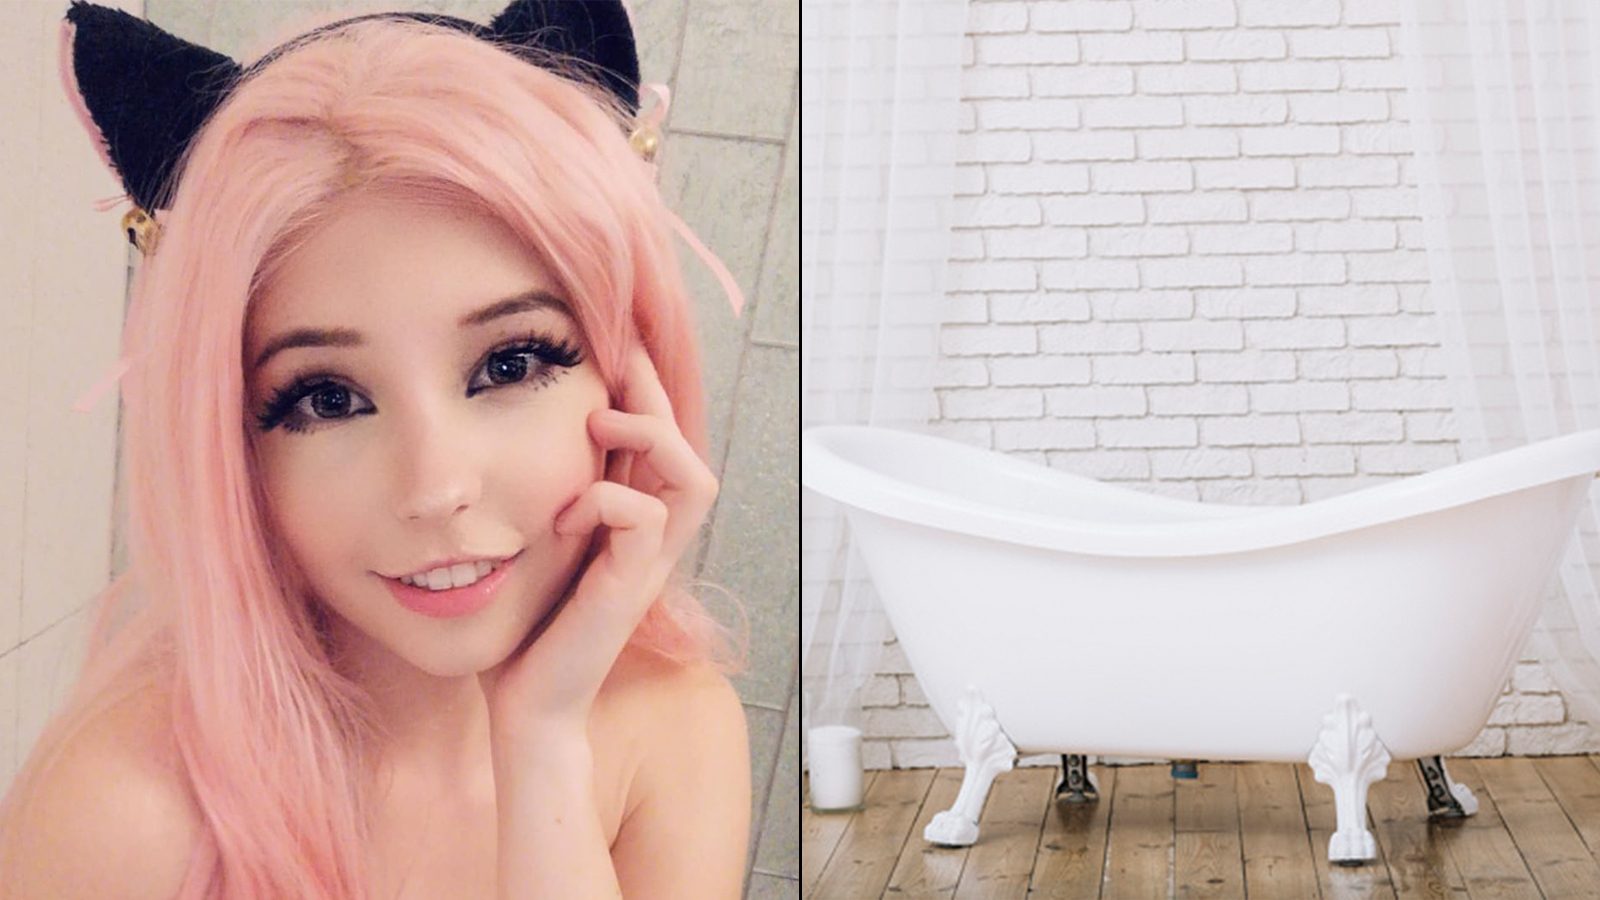 Belle Delphine sold bath water for $30 a jar. The Instagram model announced  the sale in July 2019 in an Instagram post that received over…